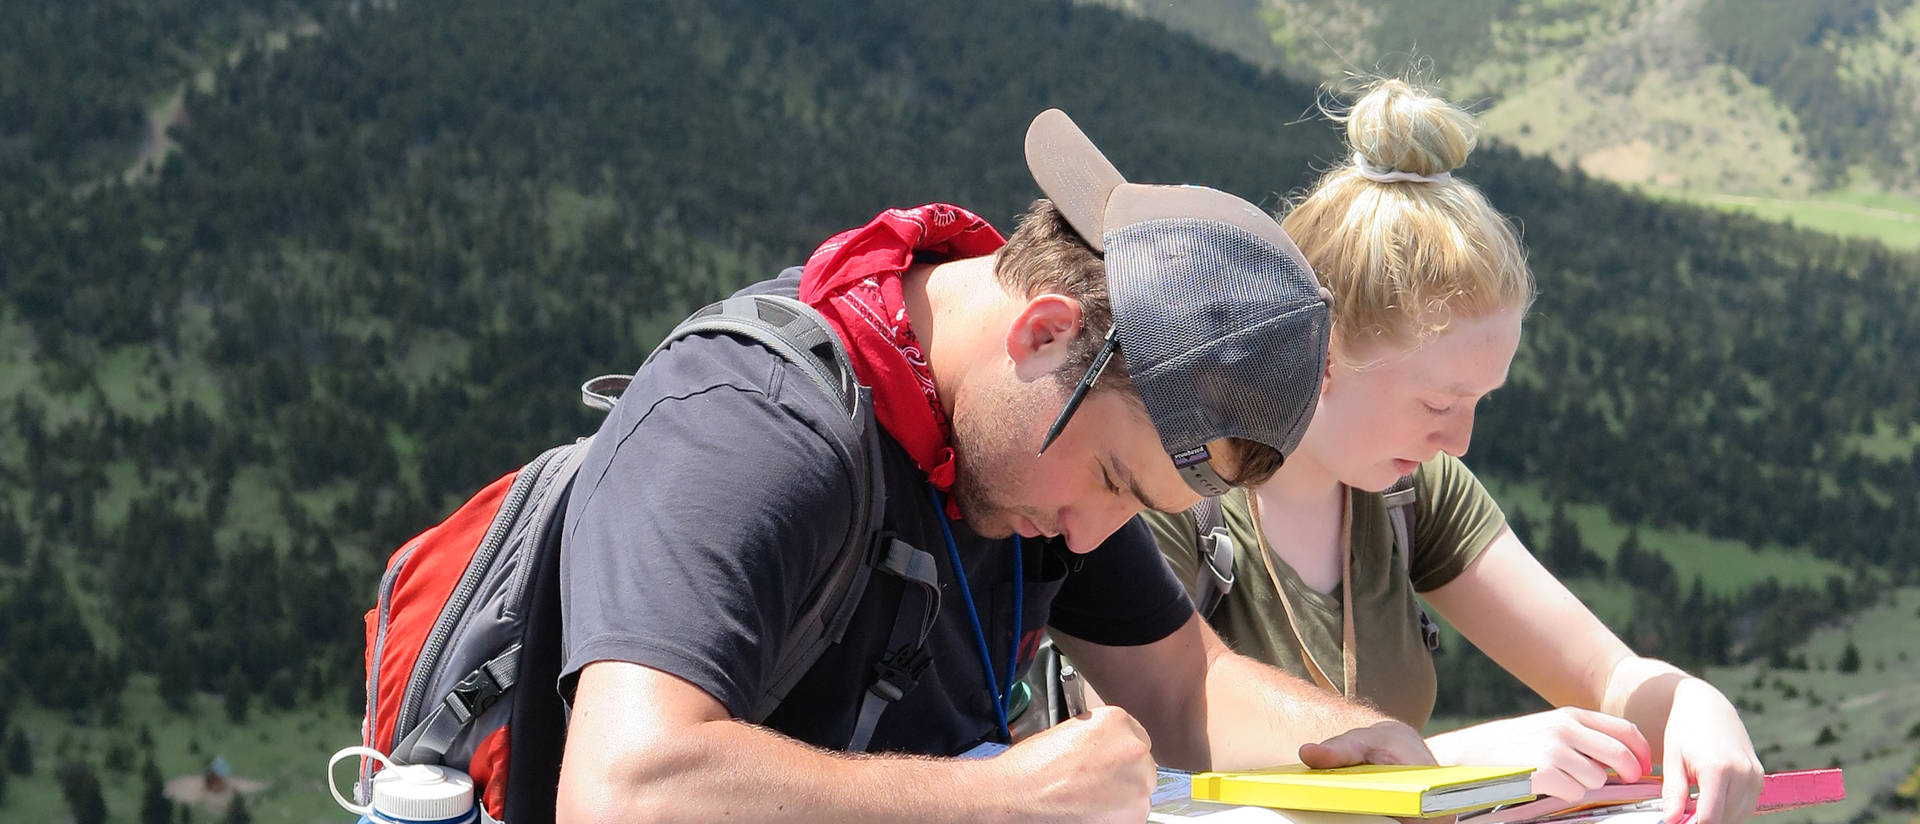 Dig It geology newsleter cover photo, students in mountain scene